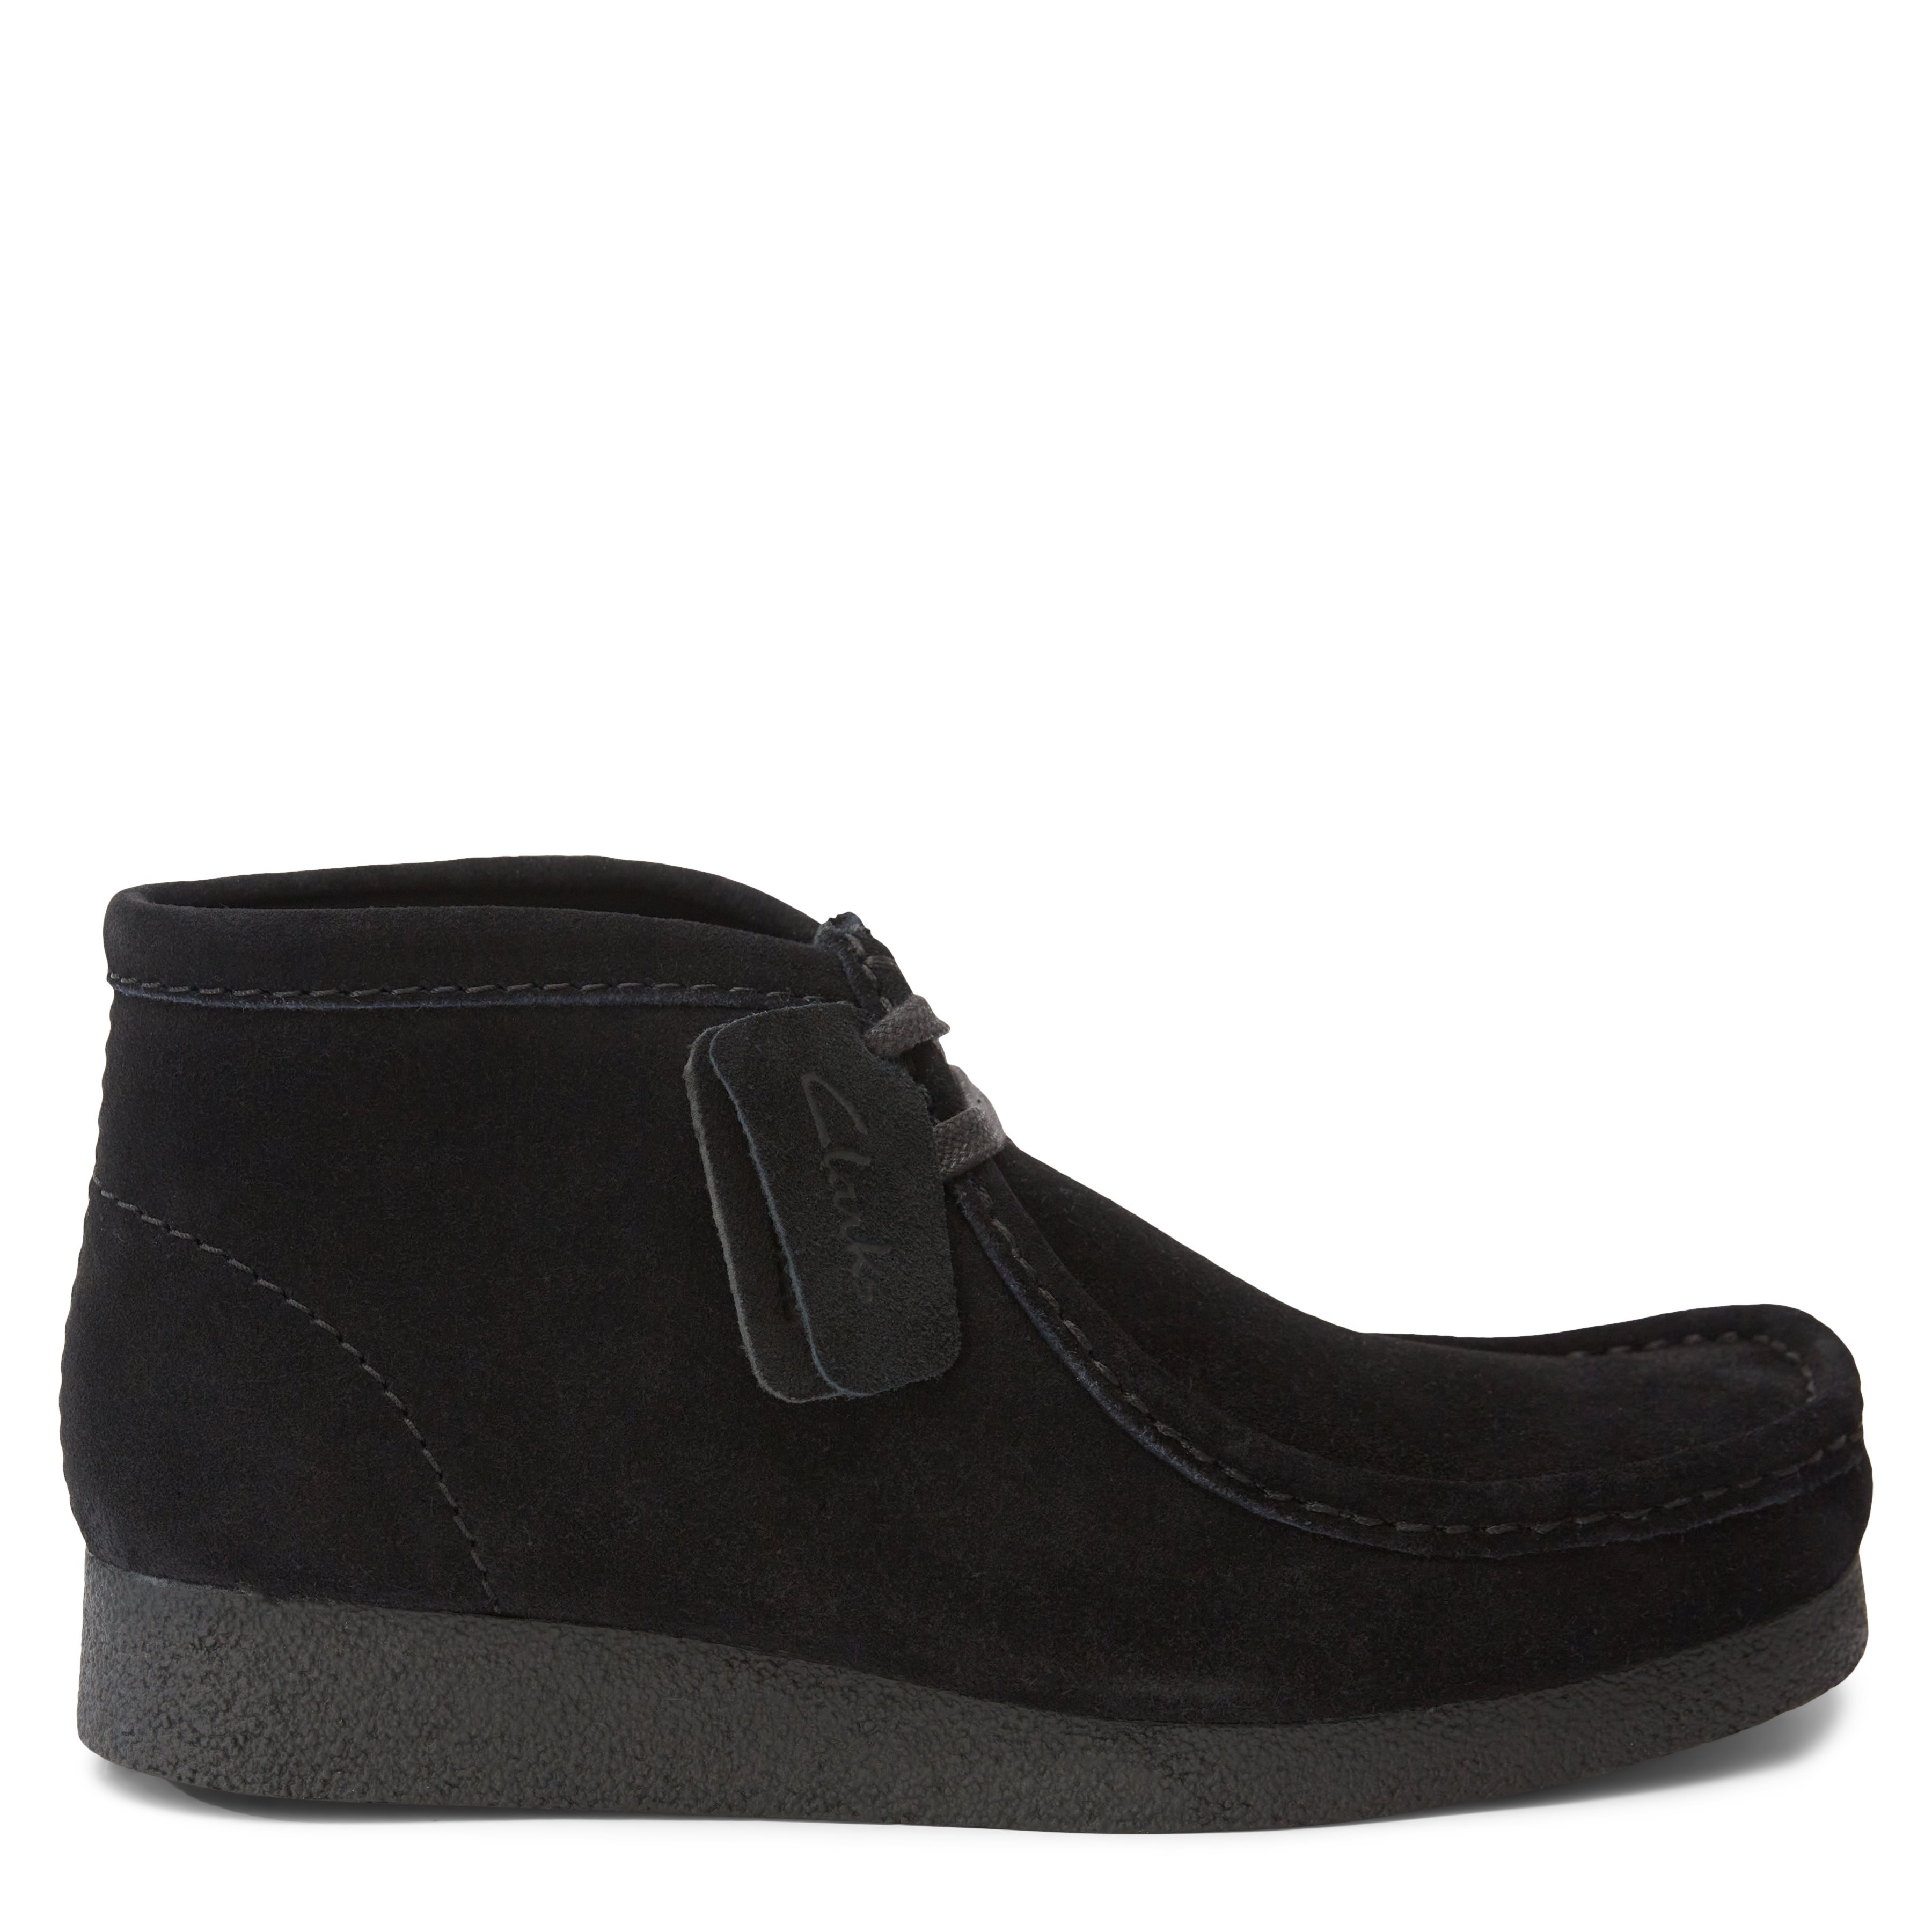 WALLABEE BOOT Shoes SORT from Clarks 1300 EUR